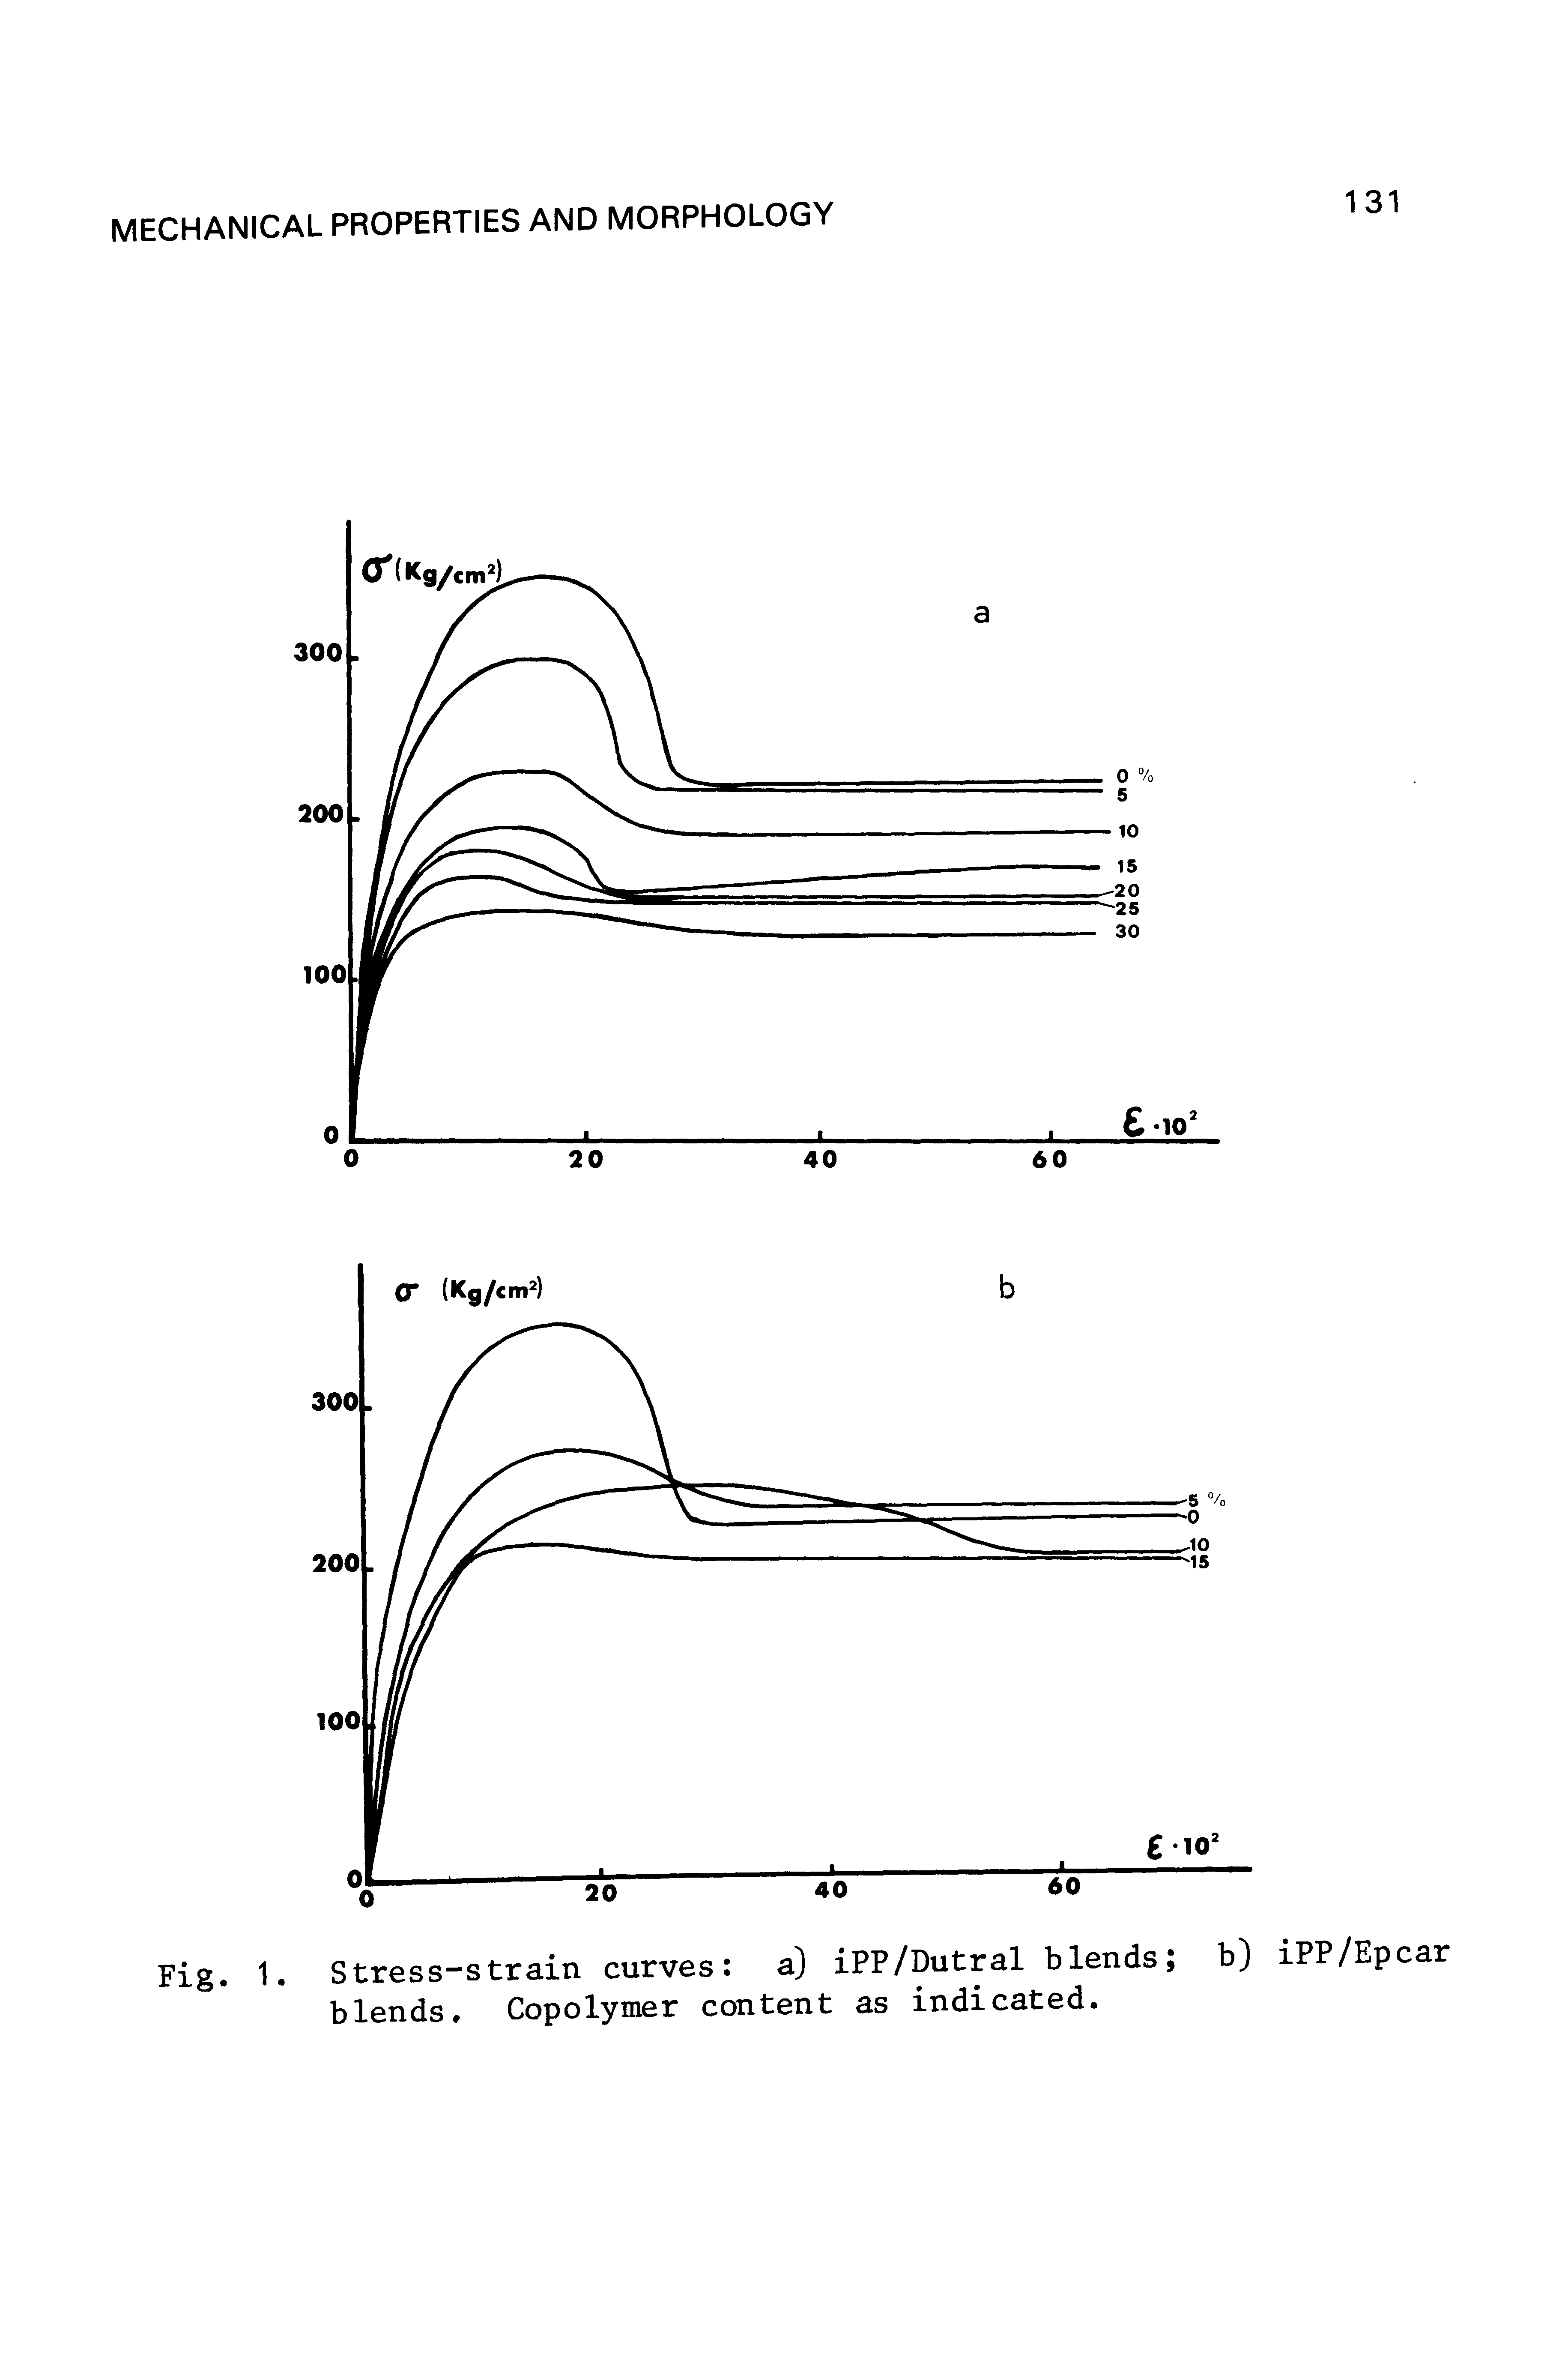 Fig. 1. Stress-strain curves a) iPP/Dutral blends b) iPP/Epcar blends. Copolymer content as indicated.